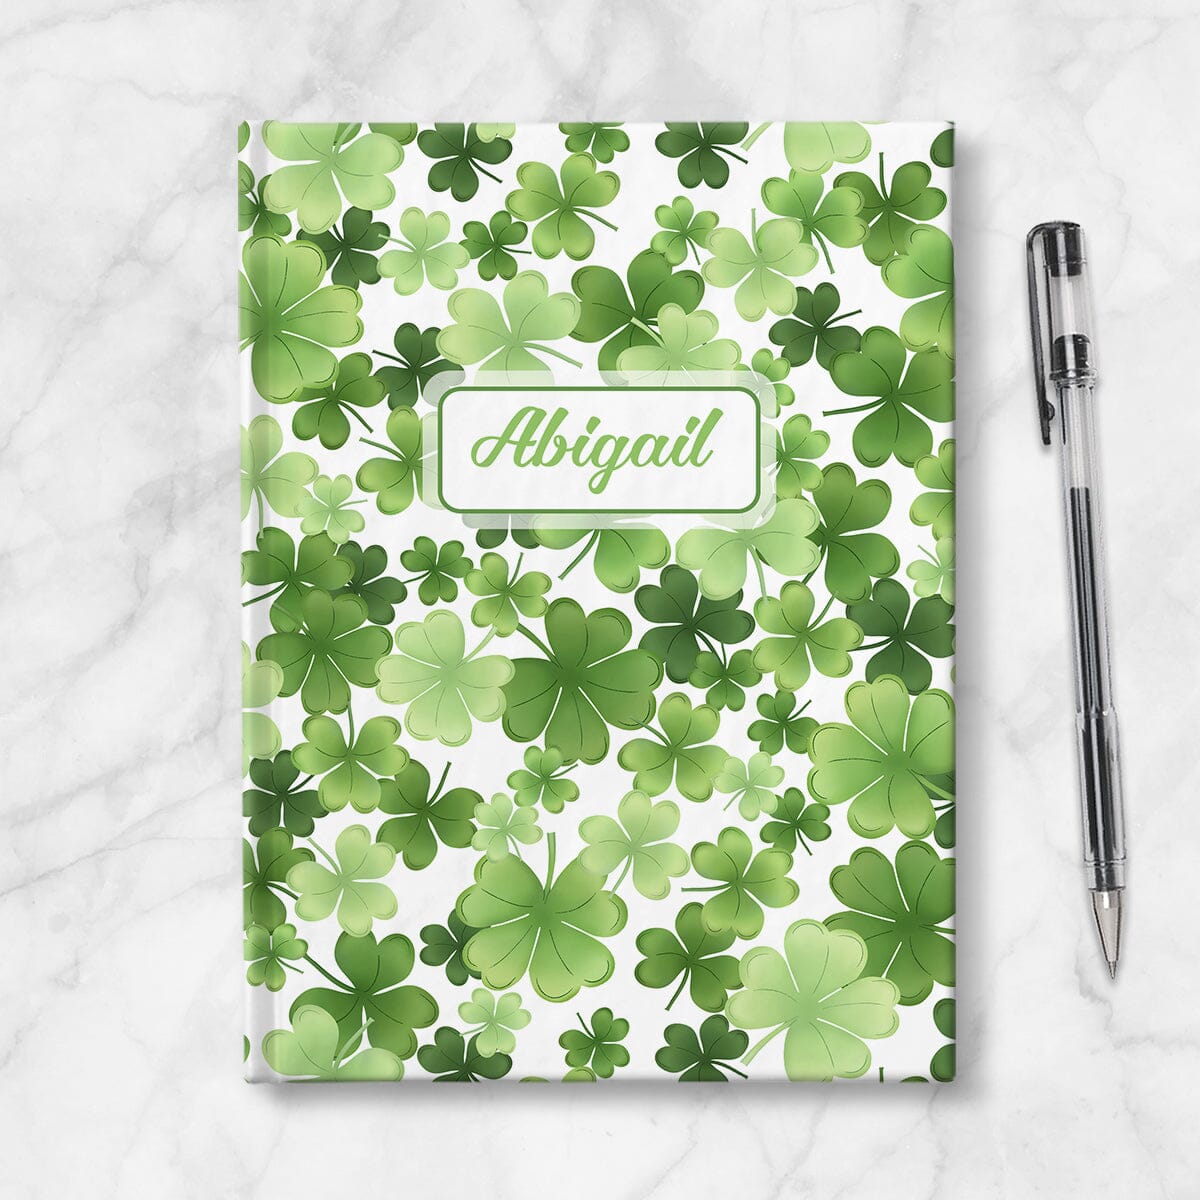 Personalized Shamrocks and 4-Leaf Clovers Journal at Artistically Invited. Image shows book on table with a pen next to it. 